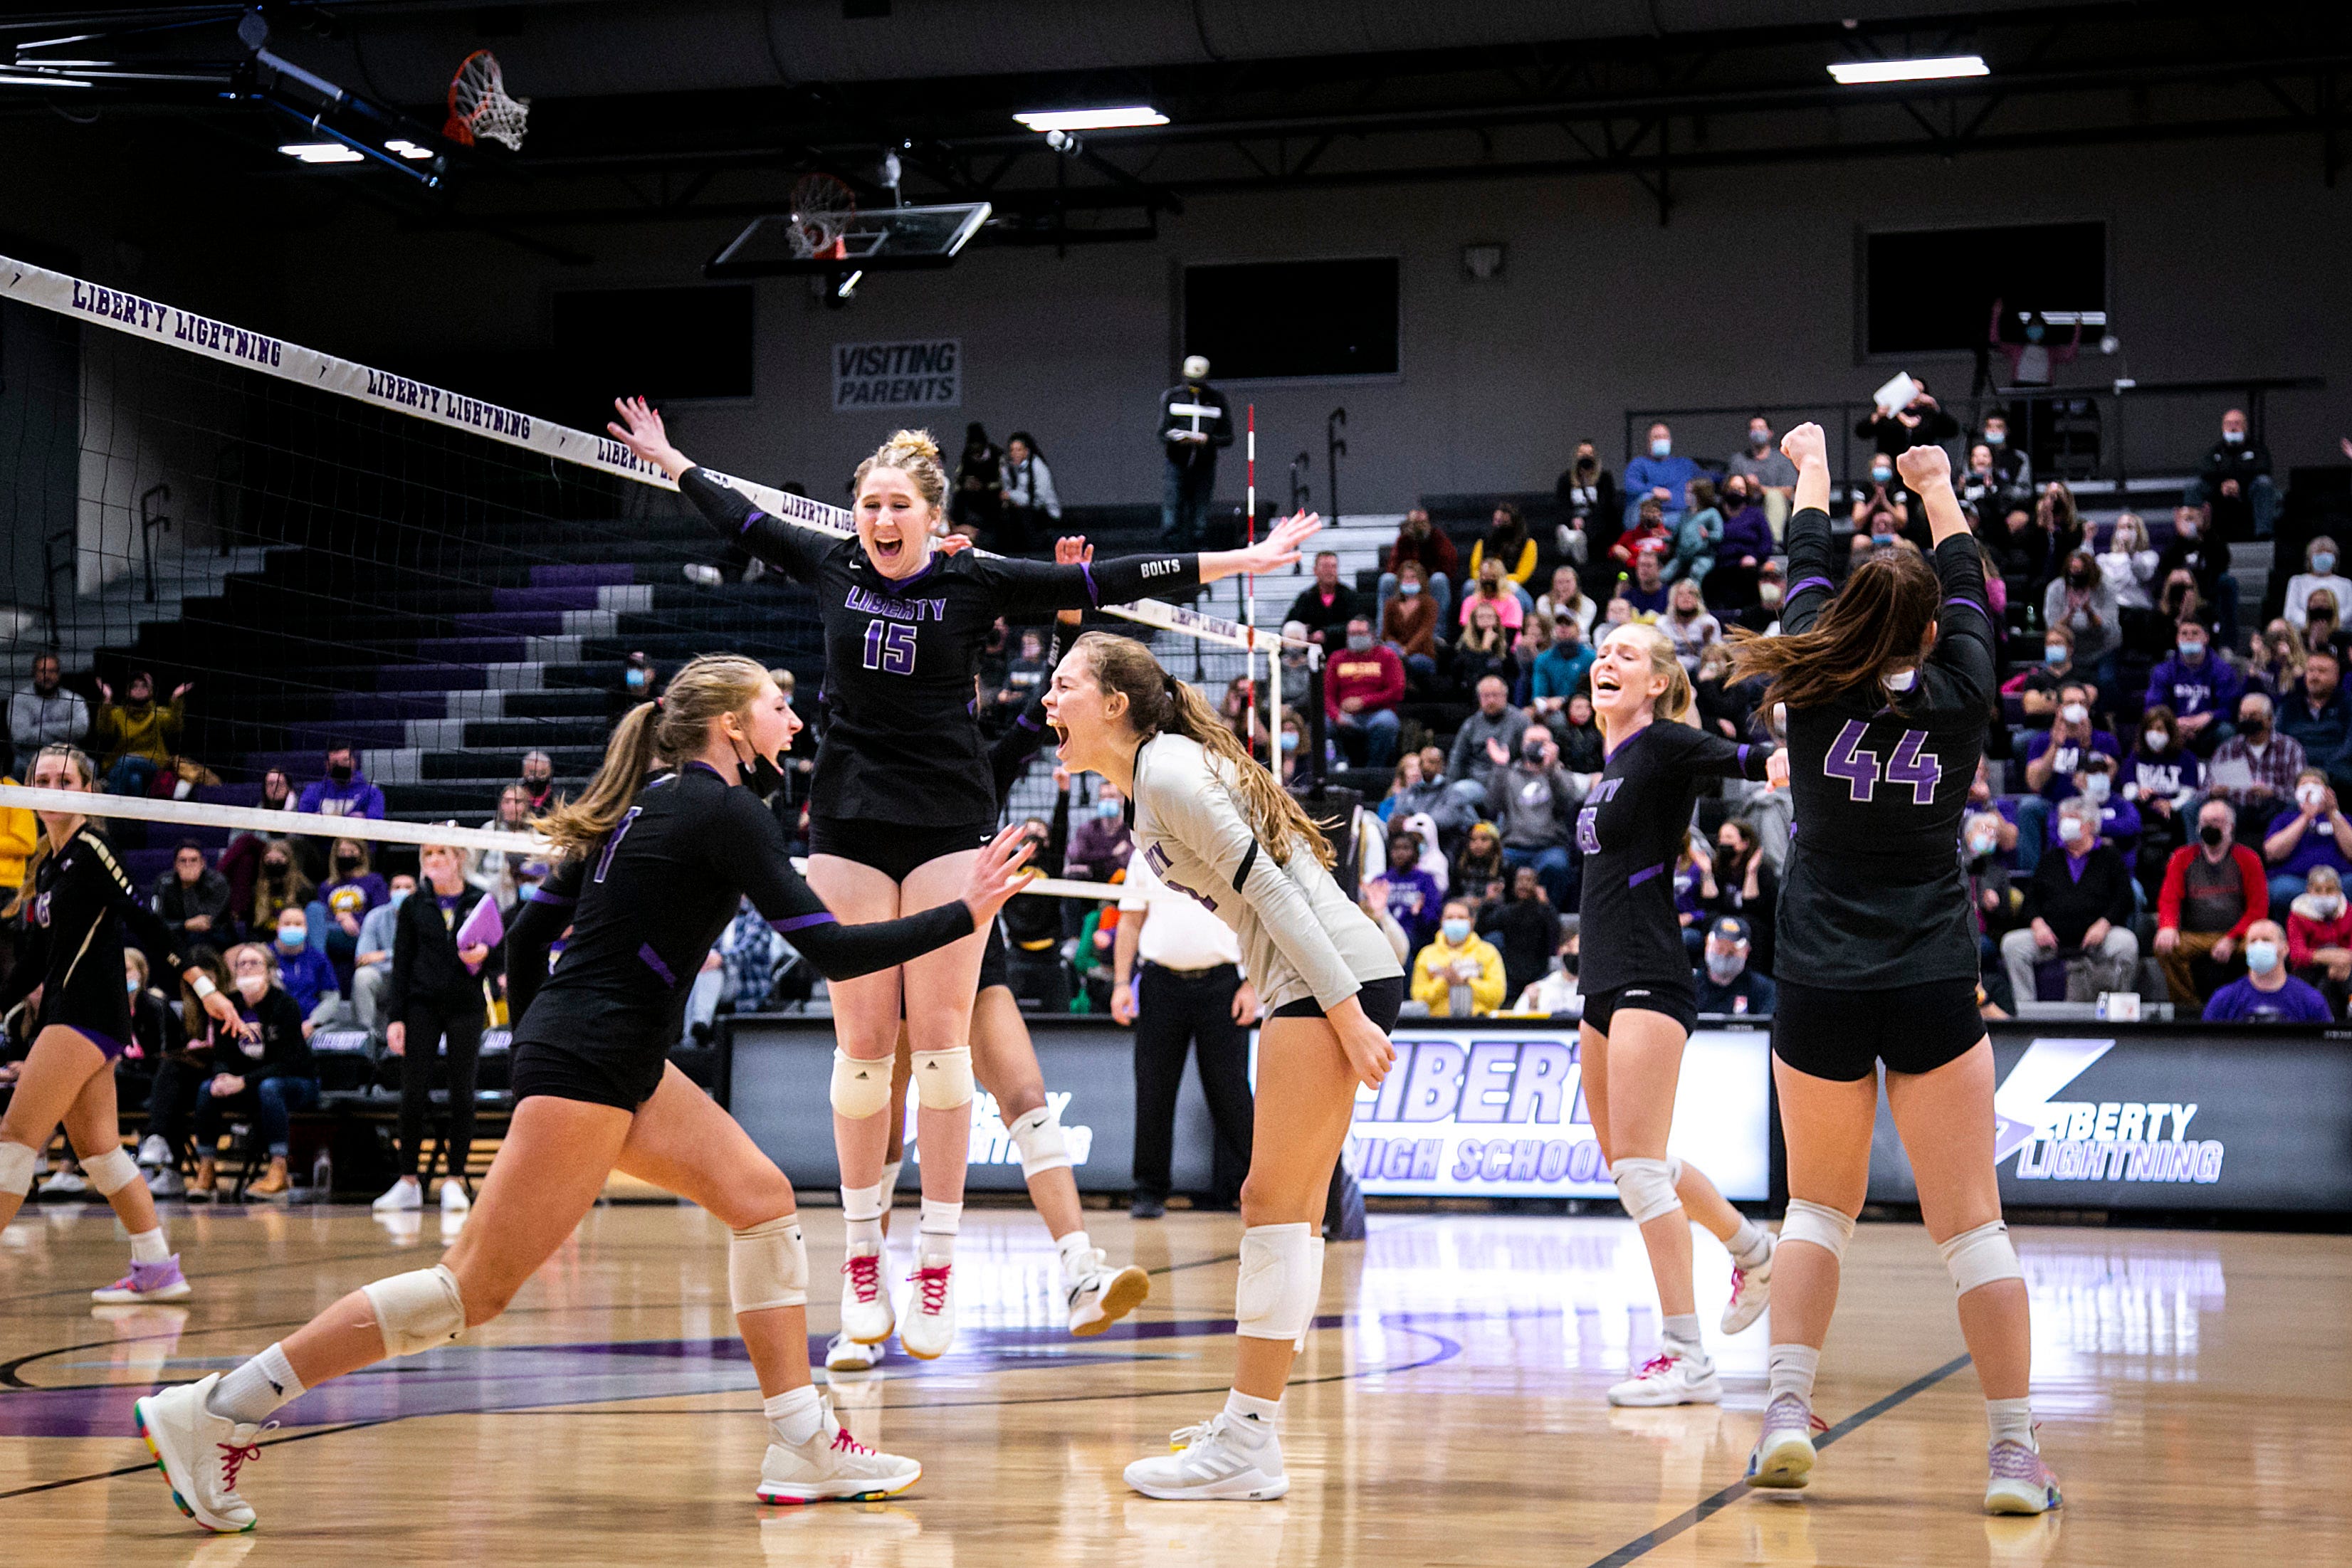 How to watch the 2021 Iowa high school state volleyball tournament